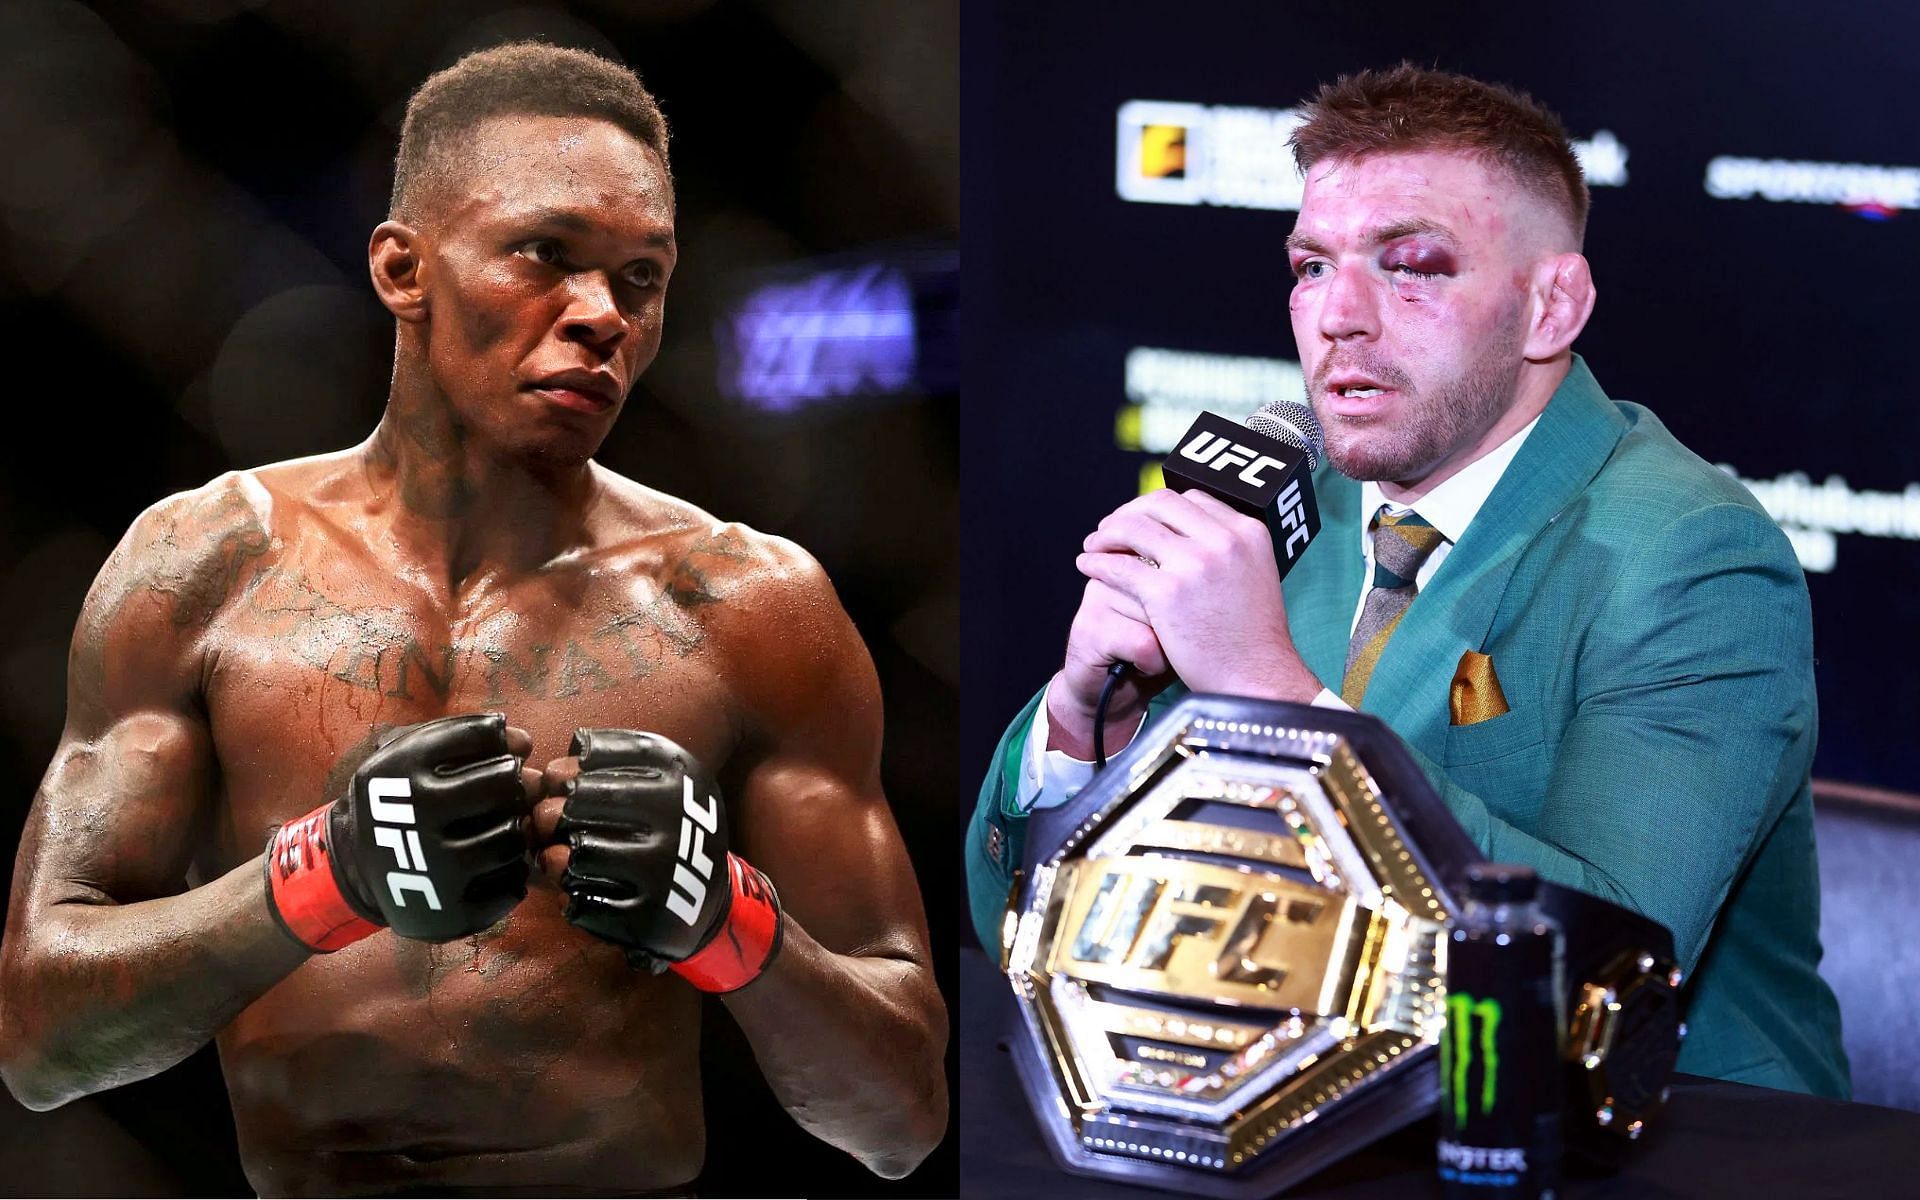 Dricus du Plessis (right) eyeing a bout with Israel Adesanya (left) next [Images Courtesy: @GettyImages]